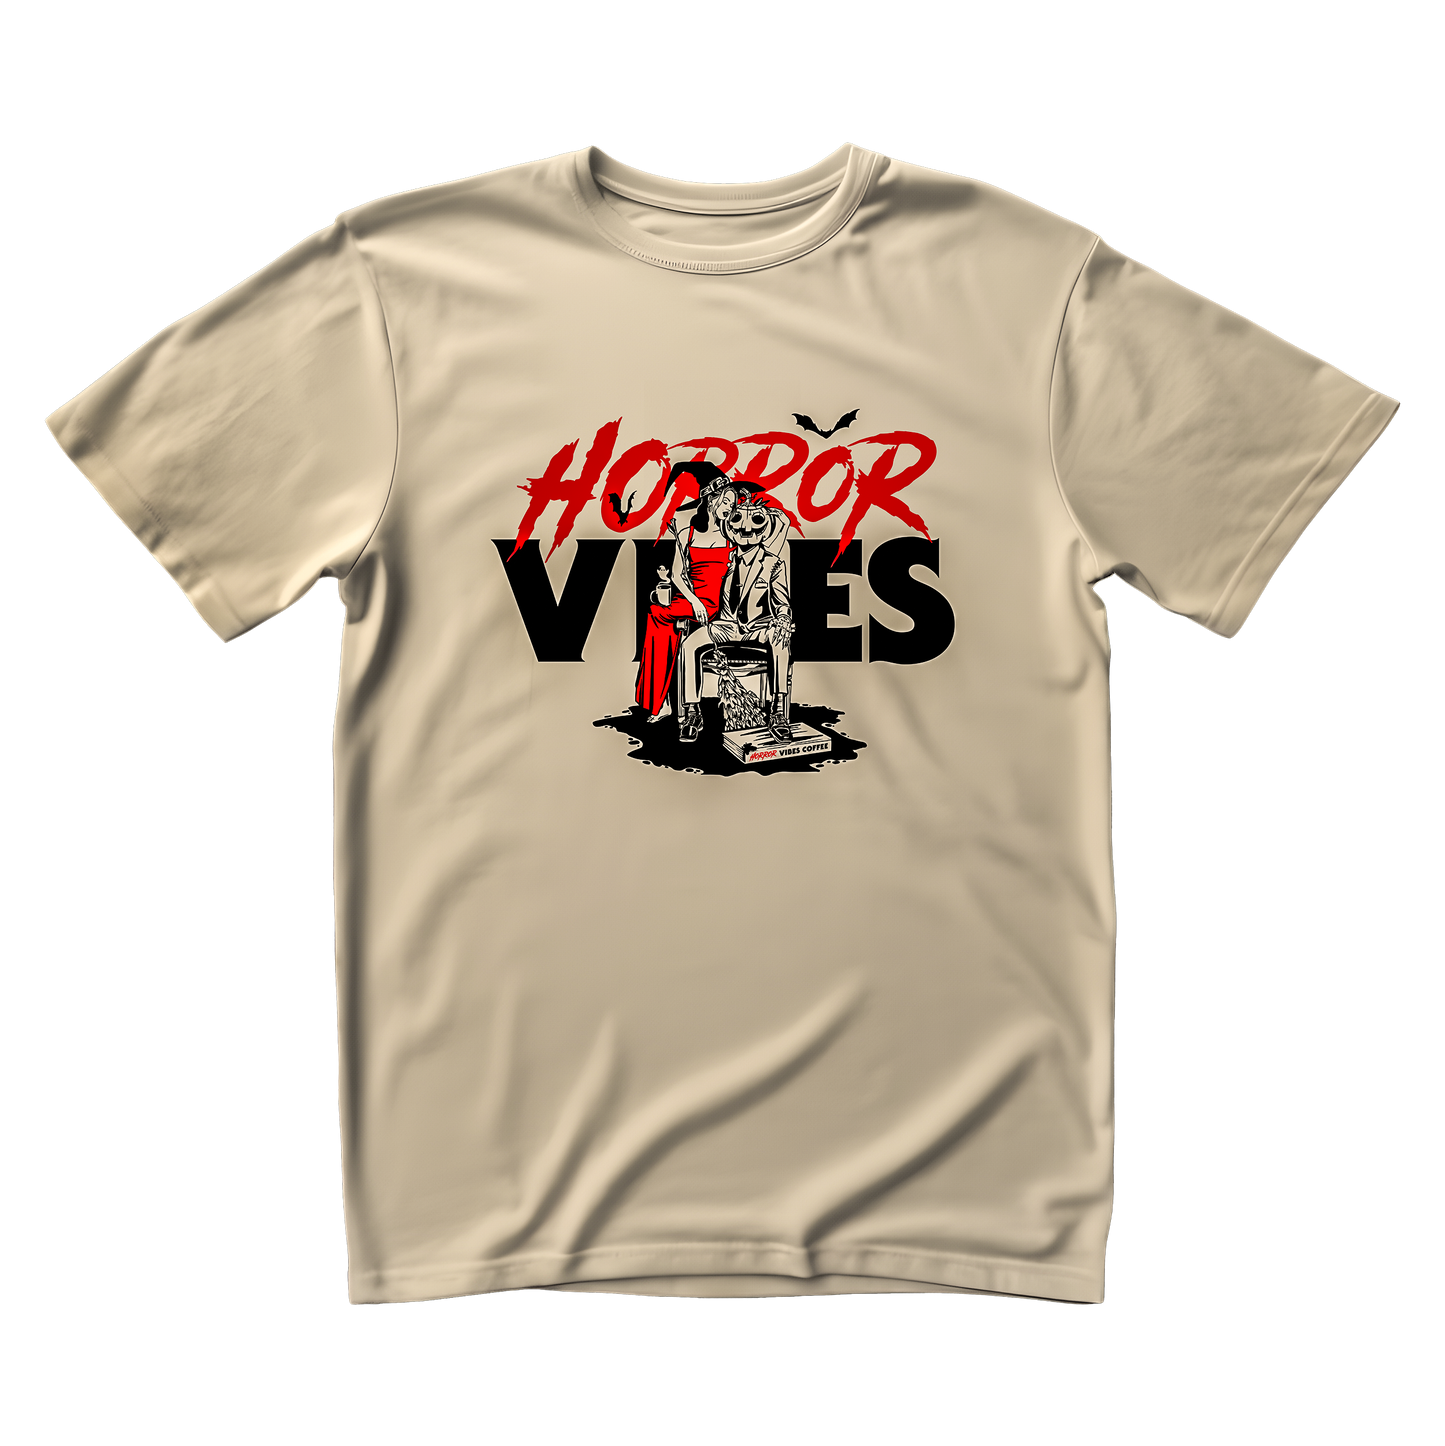 "HORROR VIBES" graphic t-shirt